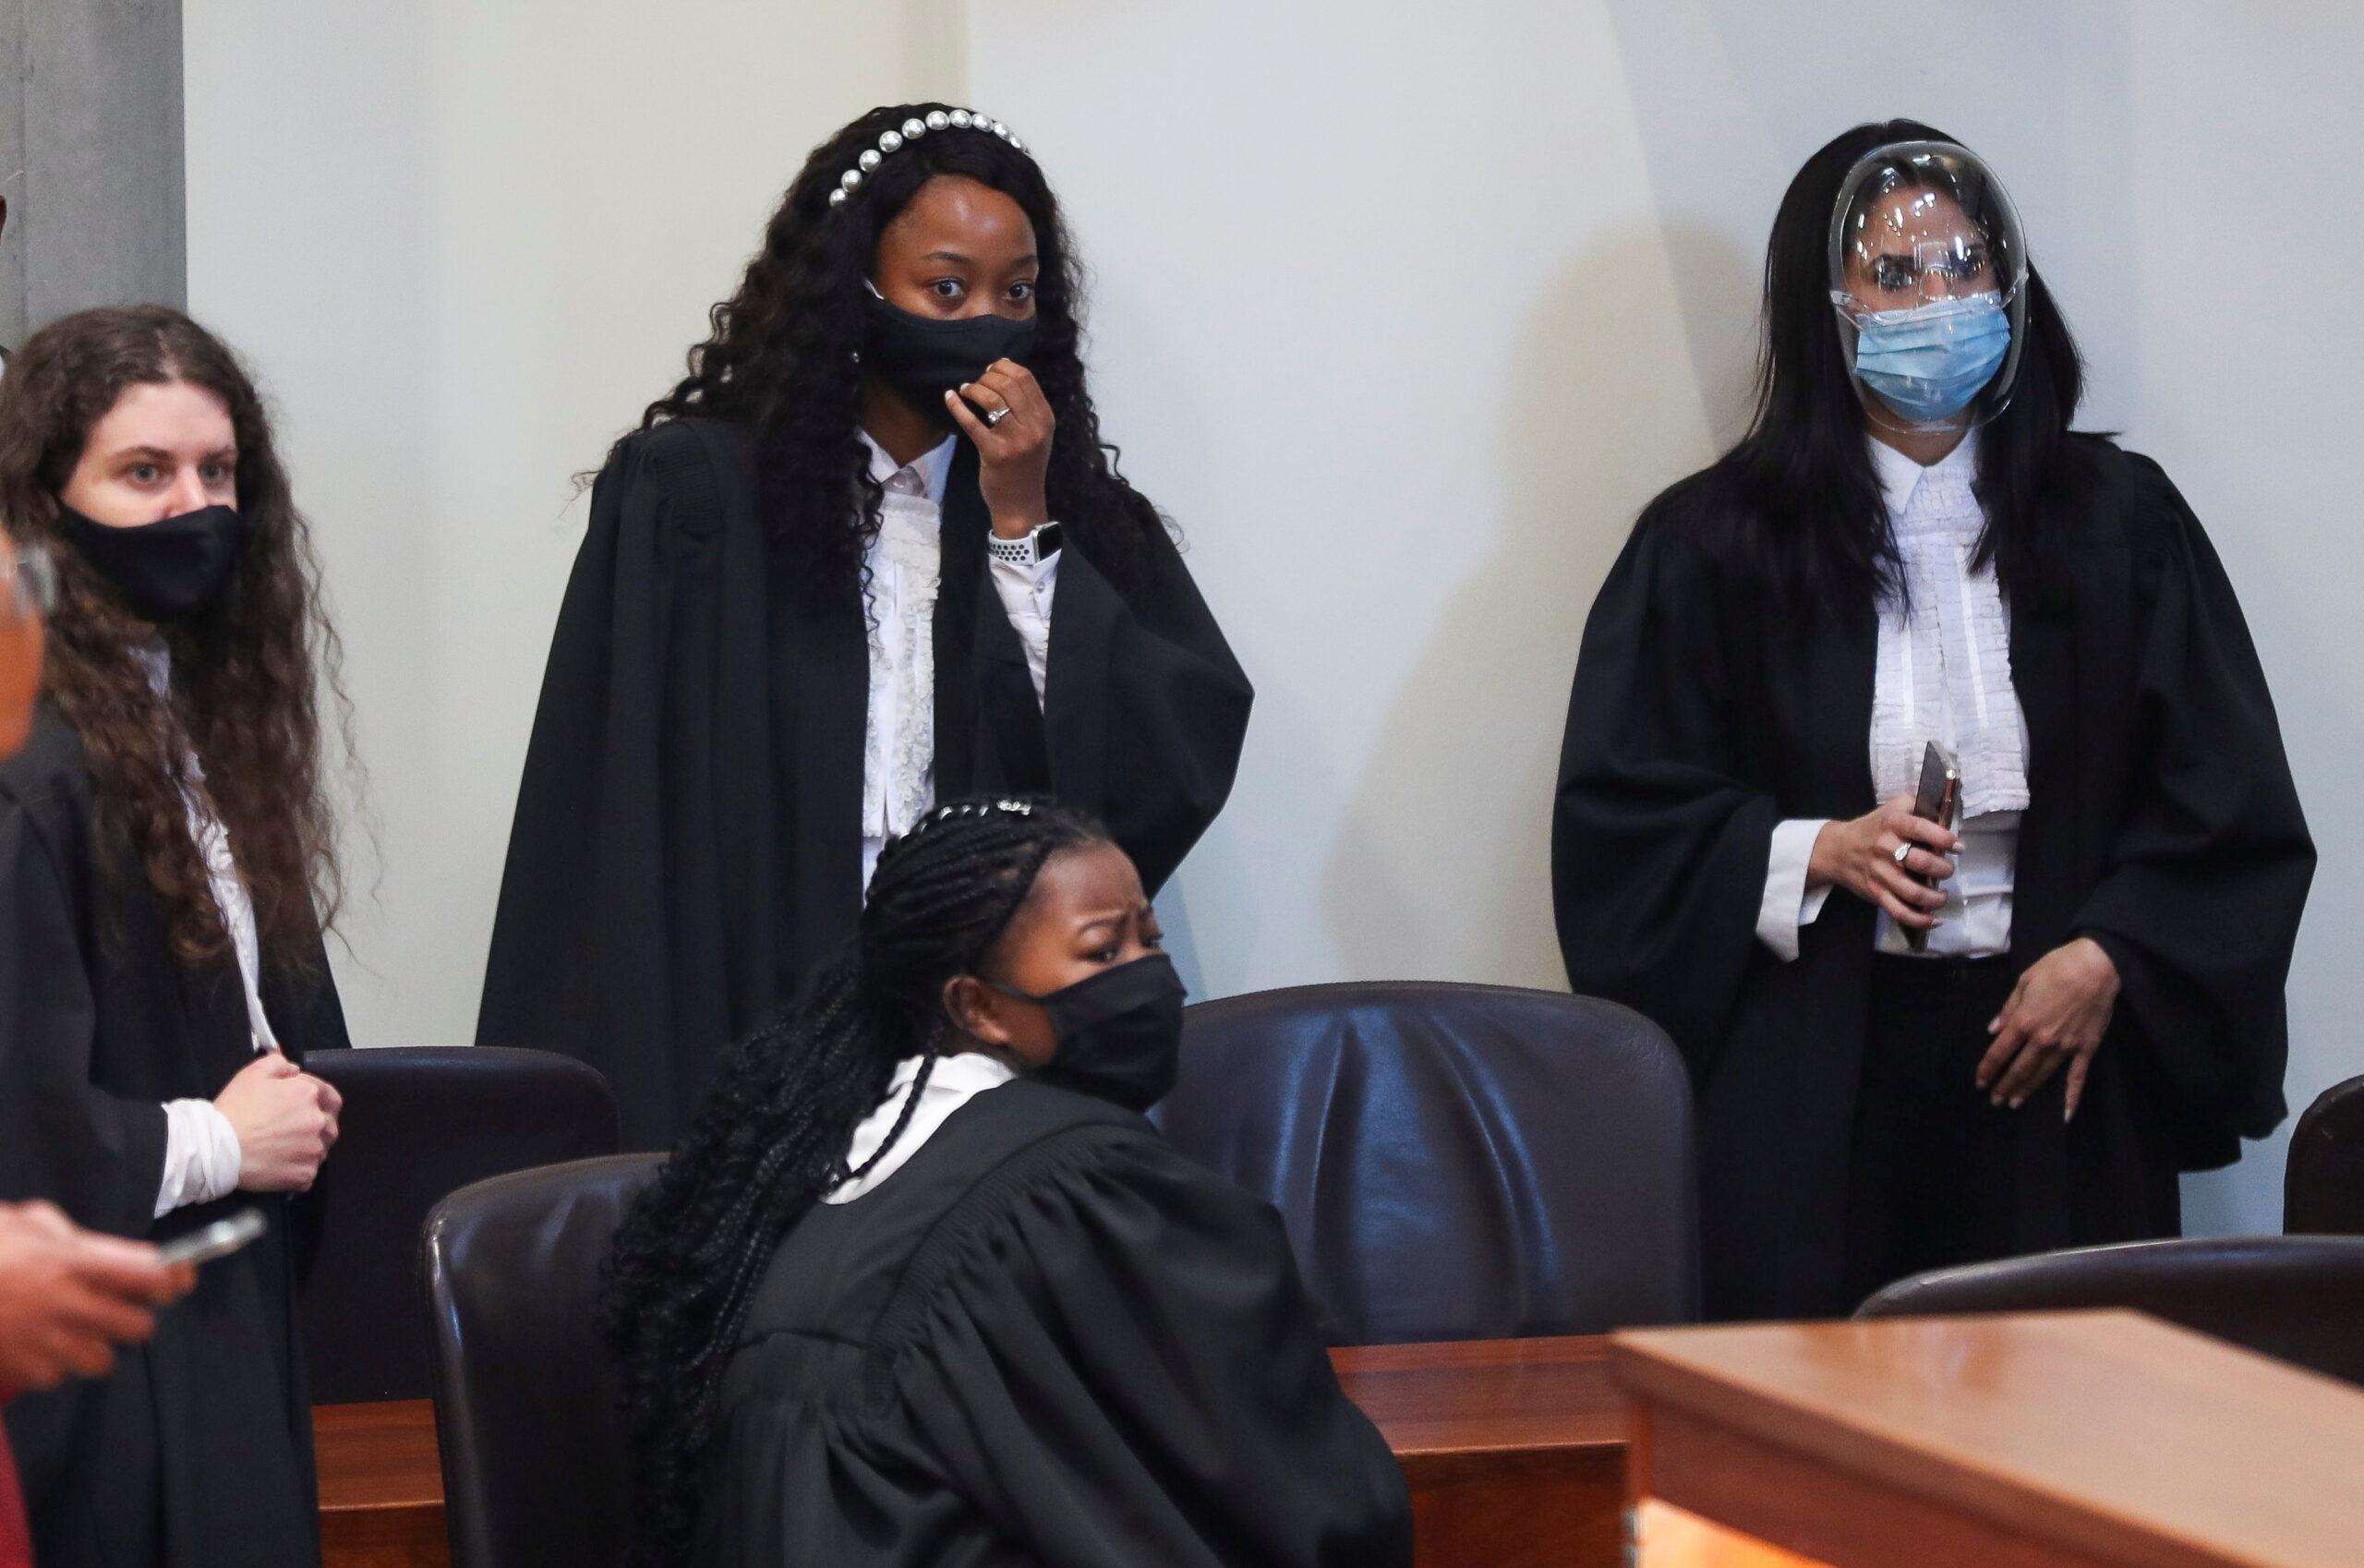 A group of women lawyers at court wearing COVID-19 masks